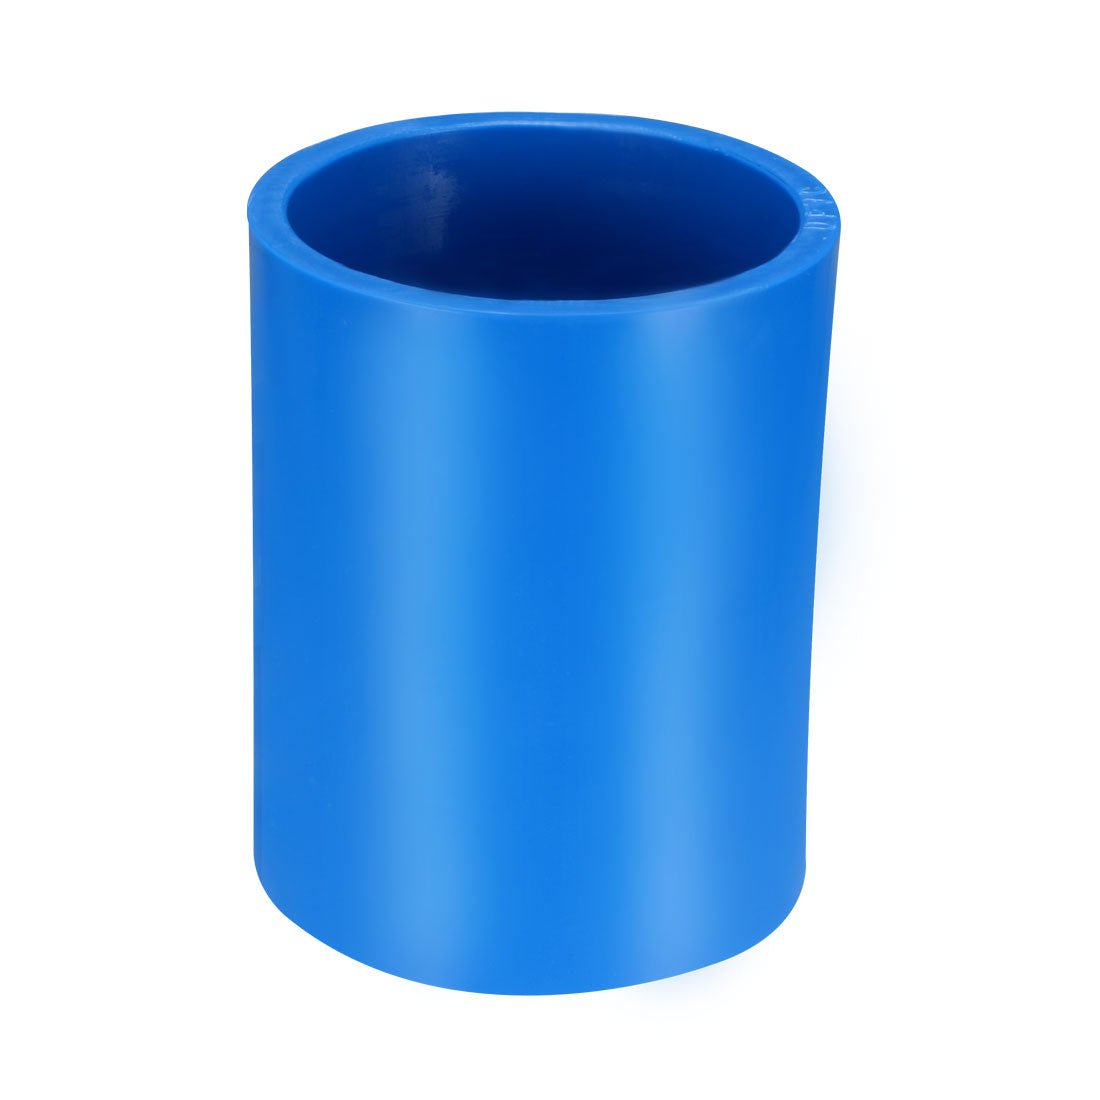 uxcell Uxcell 40mm Straight PVC Pipe Fitting Coupling Adapter Connector Blue 5 Pcs